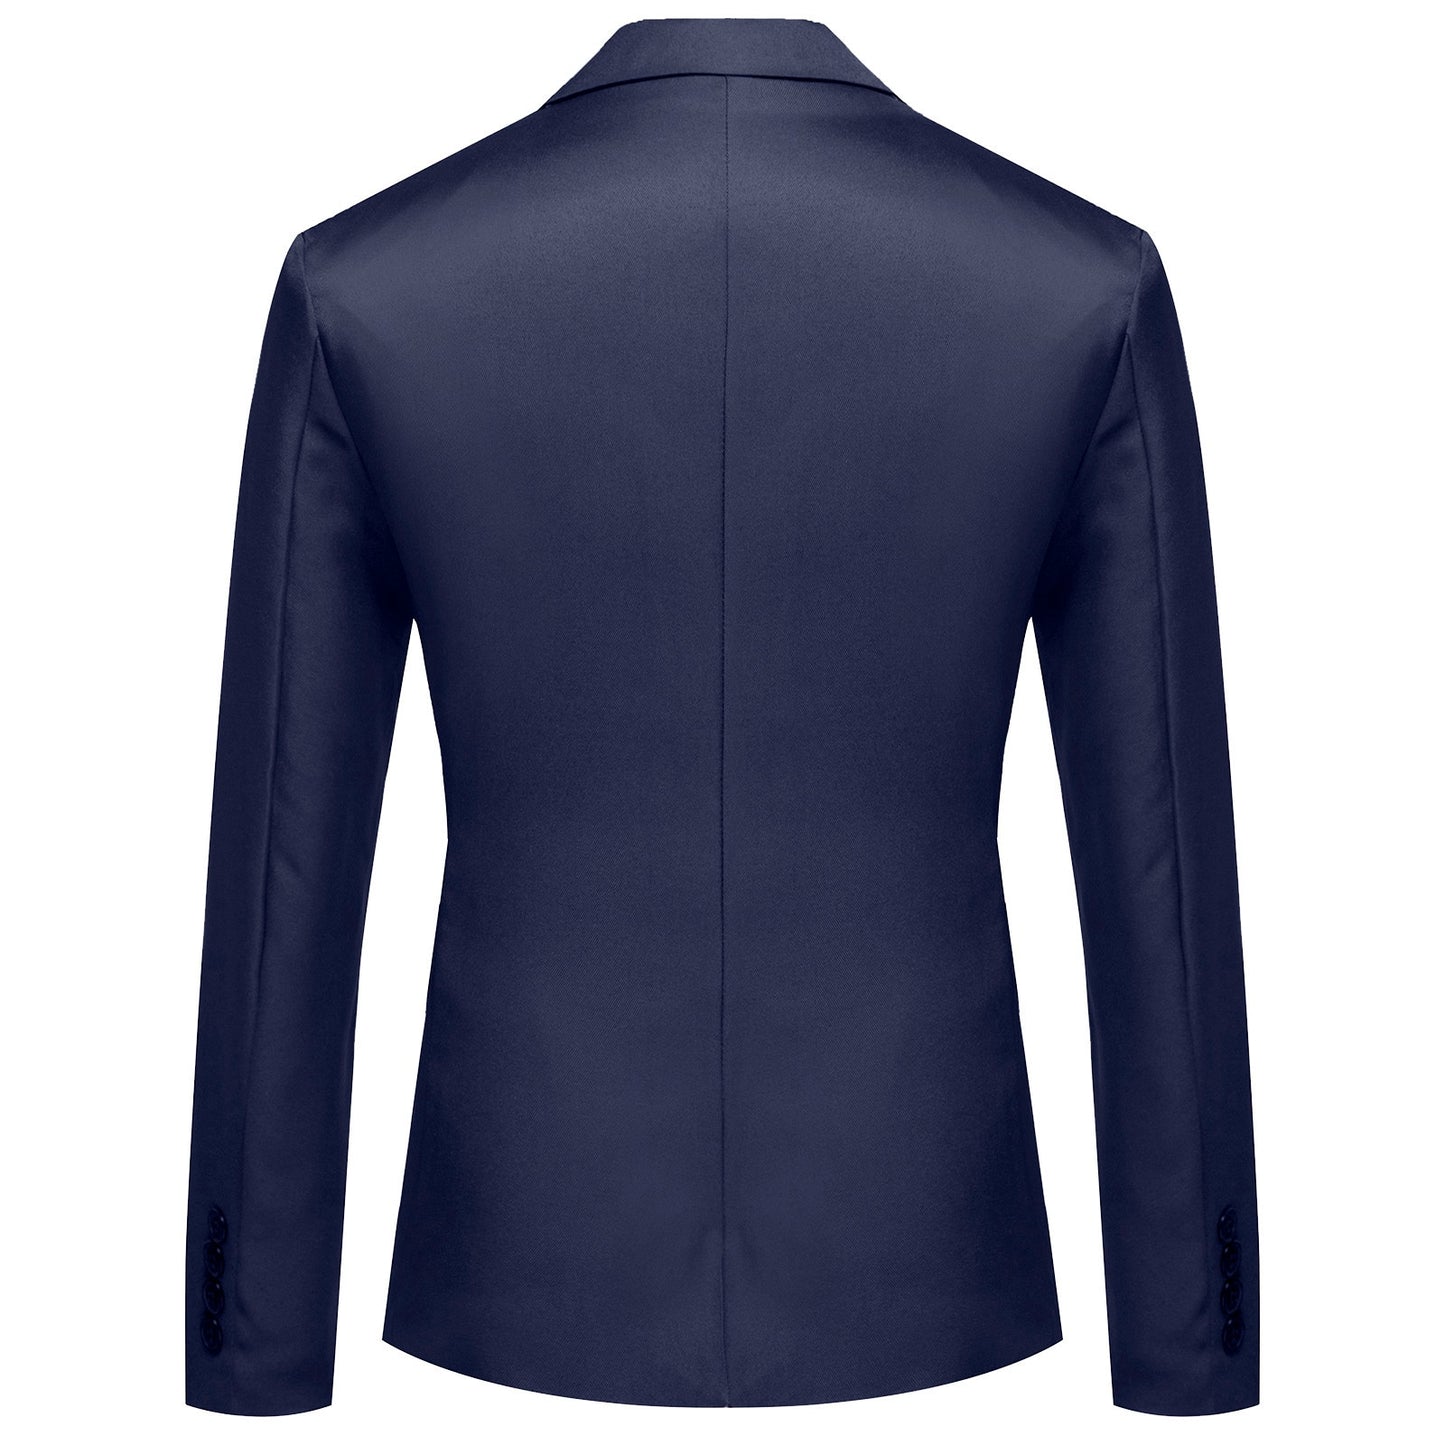 Mens Winter Two Buttons Slim Fit jacket - integrityhomedecor